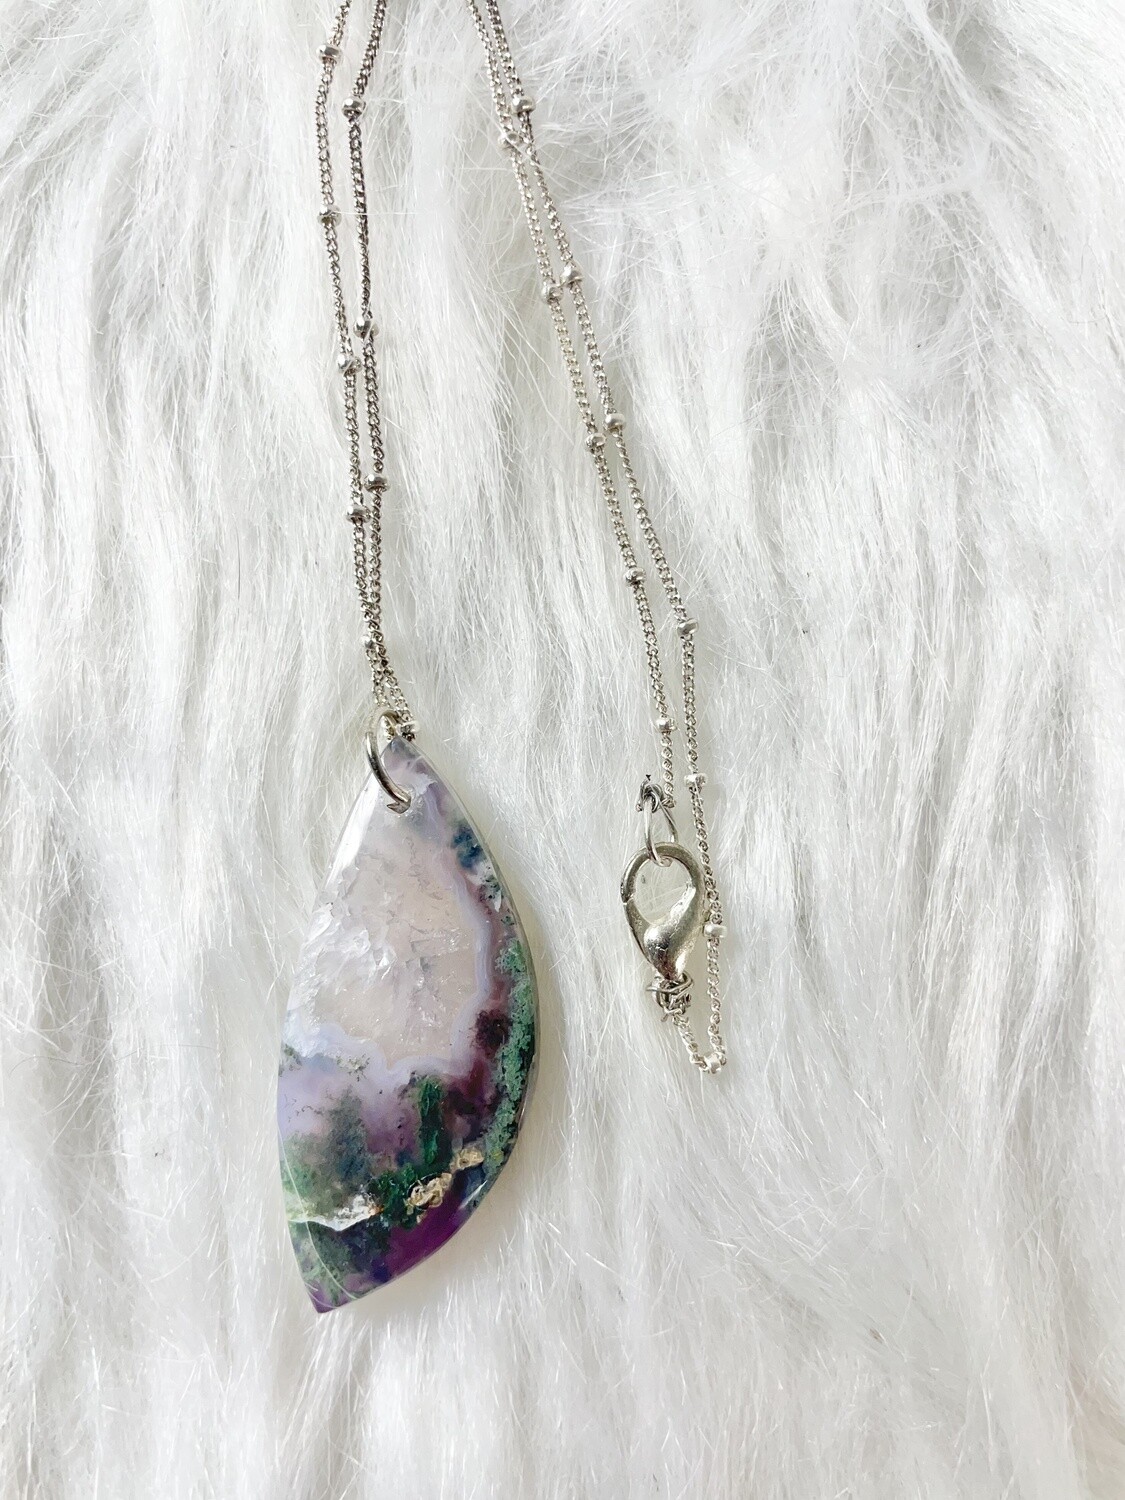 Dreamy Forest Moss Agate with Quartz Necklace